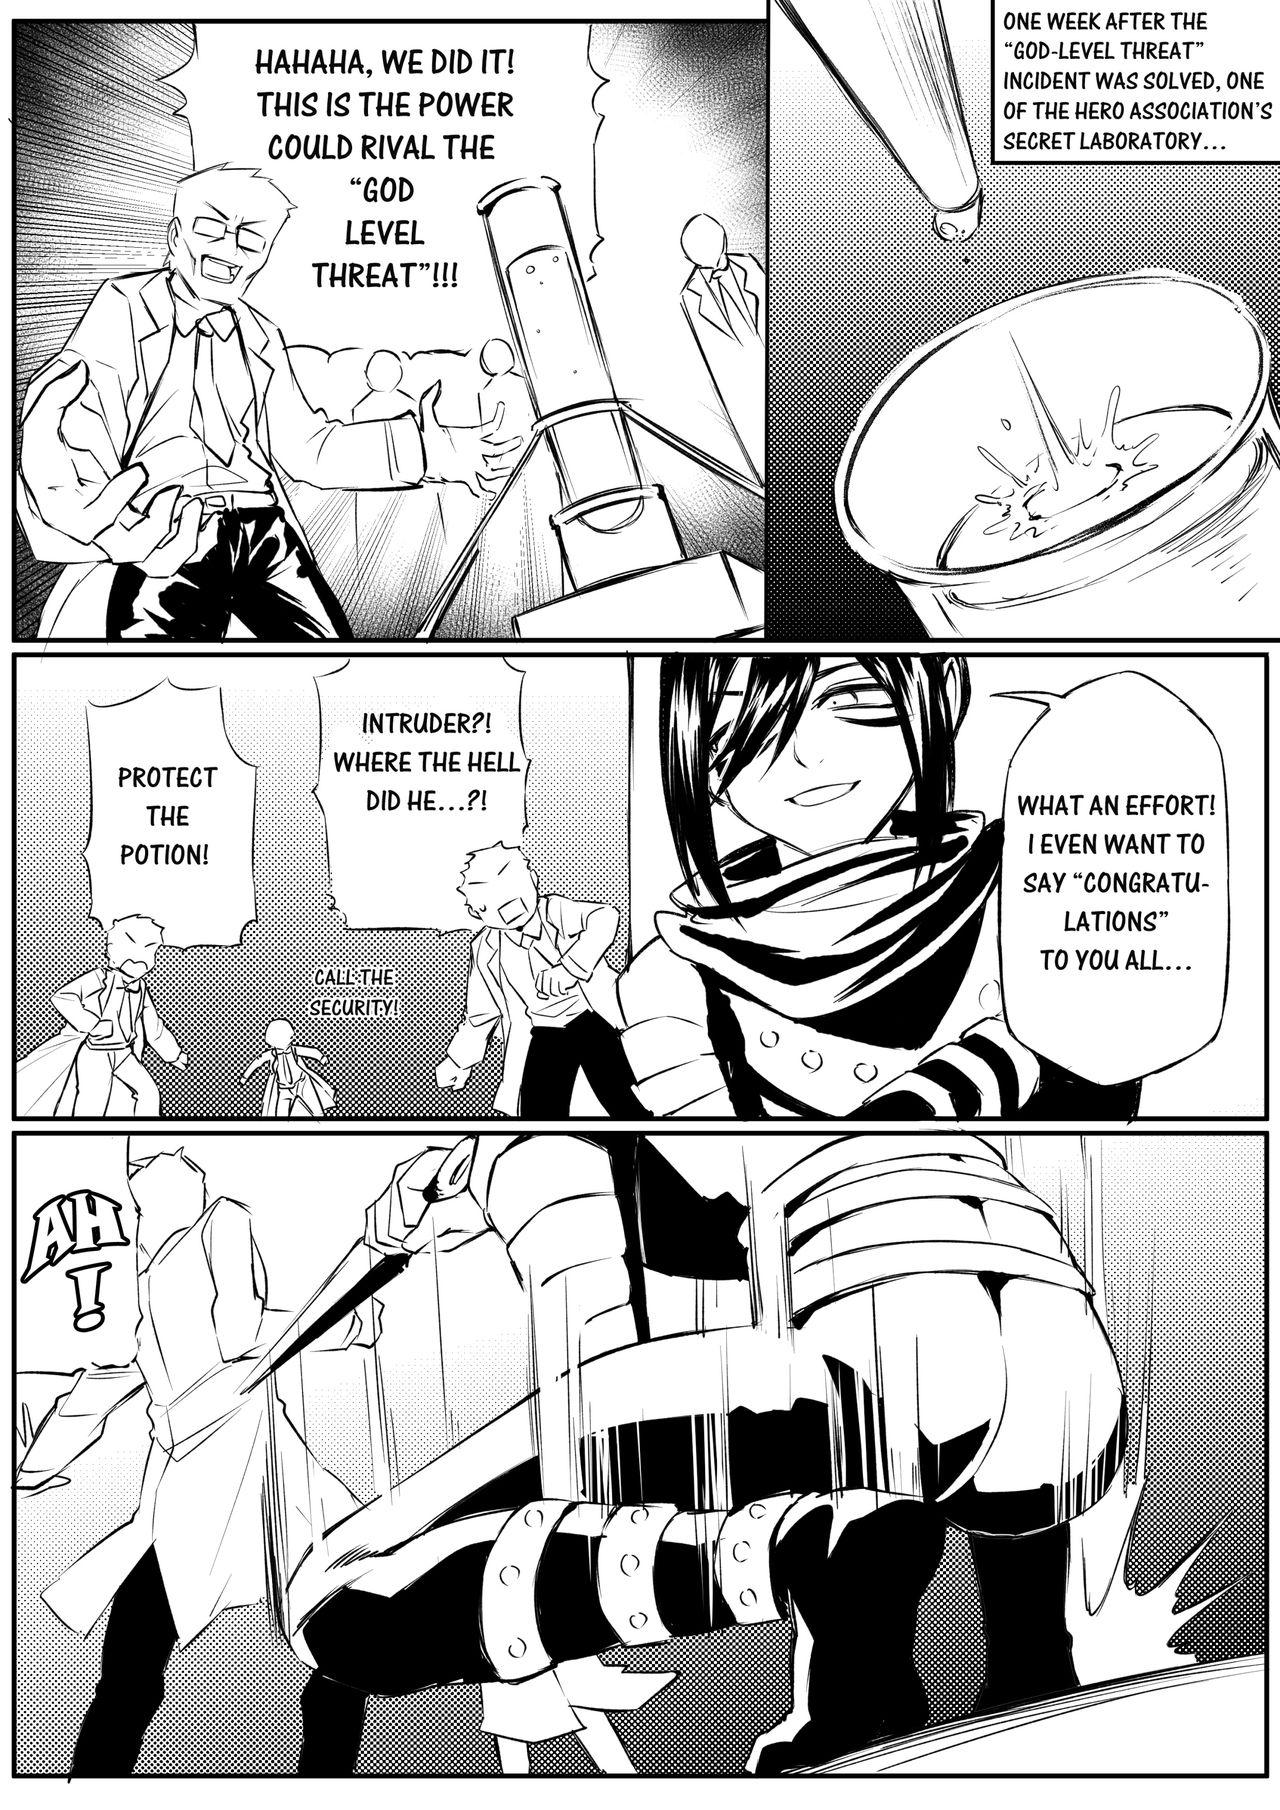 Sex Toys Attack on Sonico - One punch man Gay Friend - Page 2